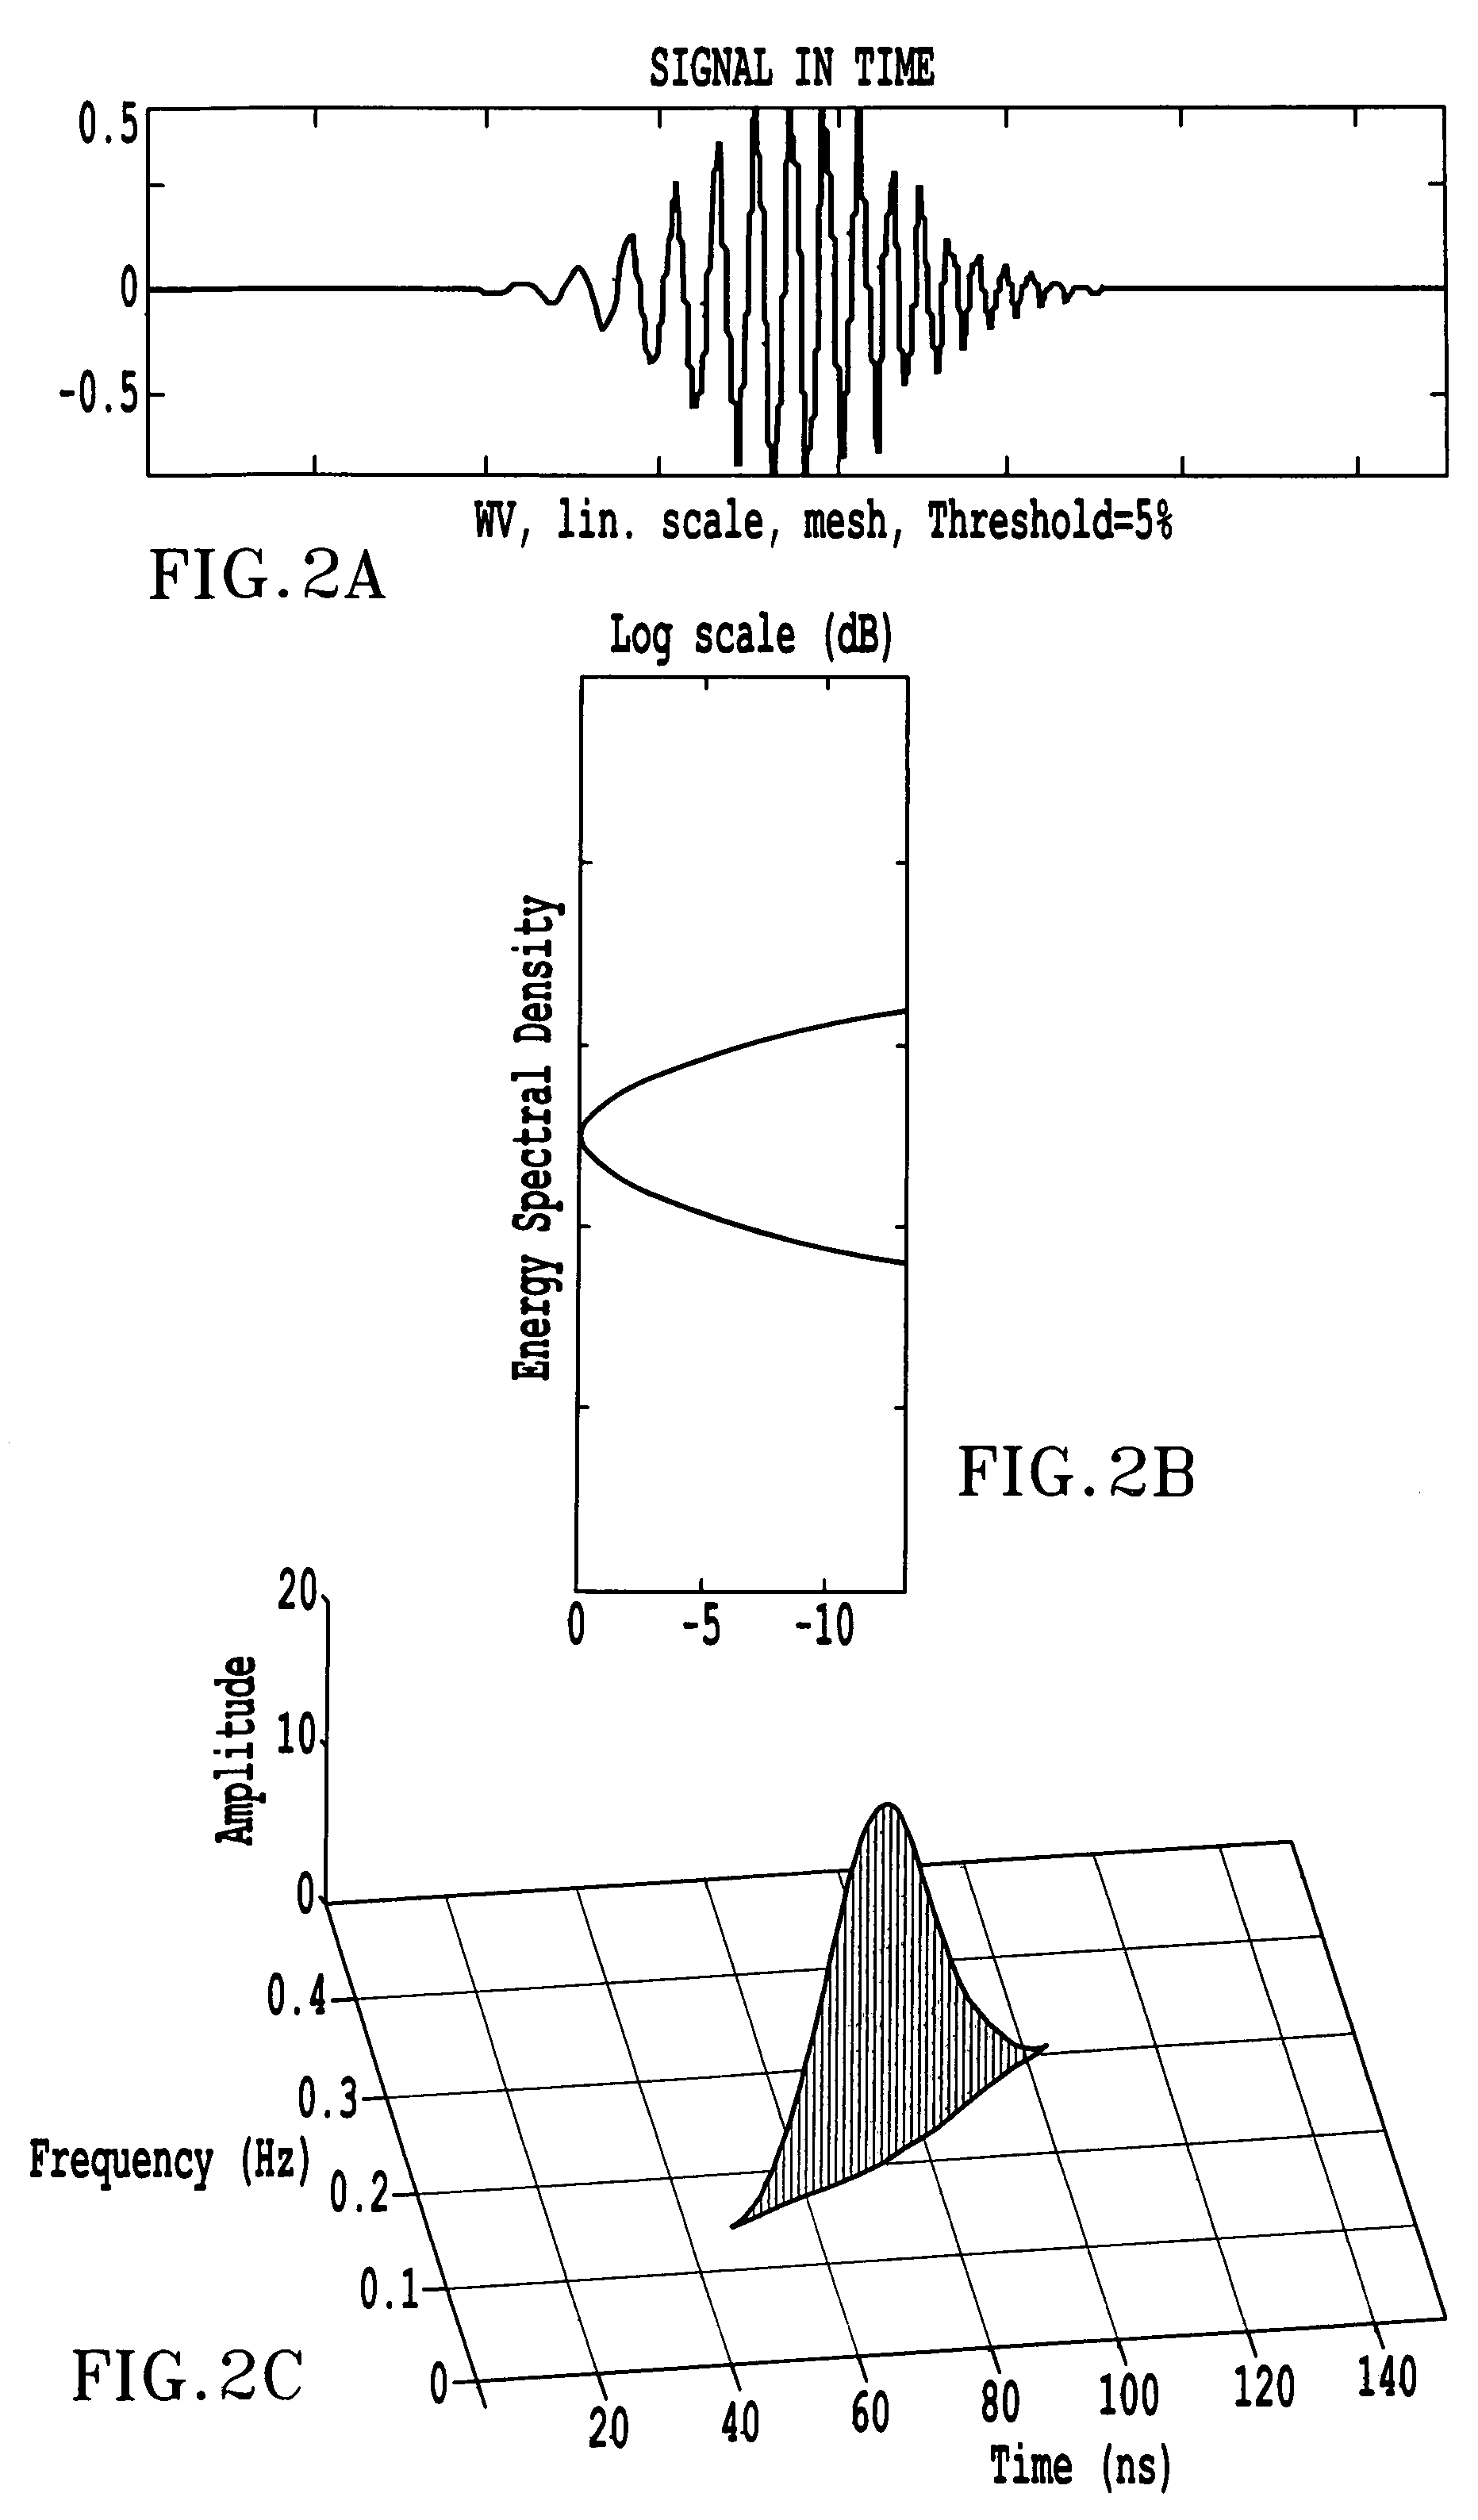 Time-frequency domain reflectometry apparatus and method